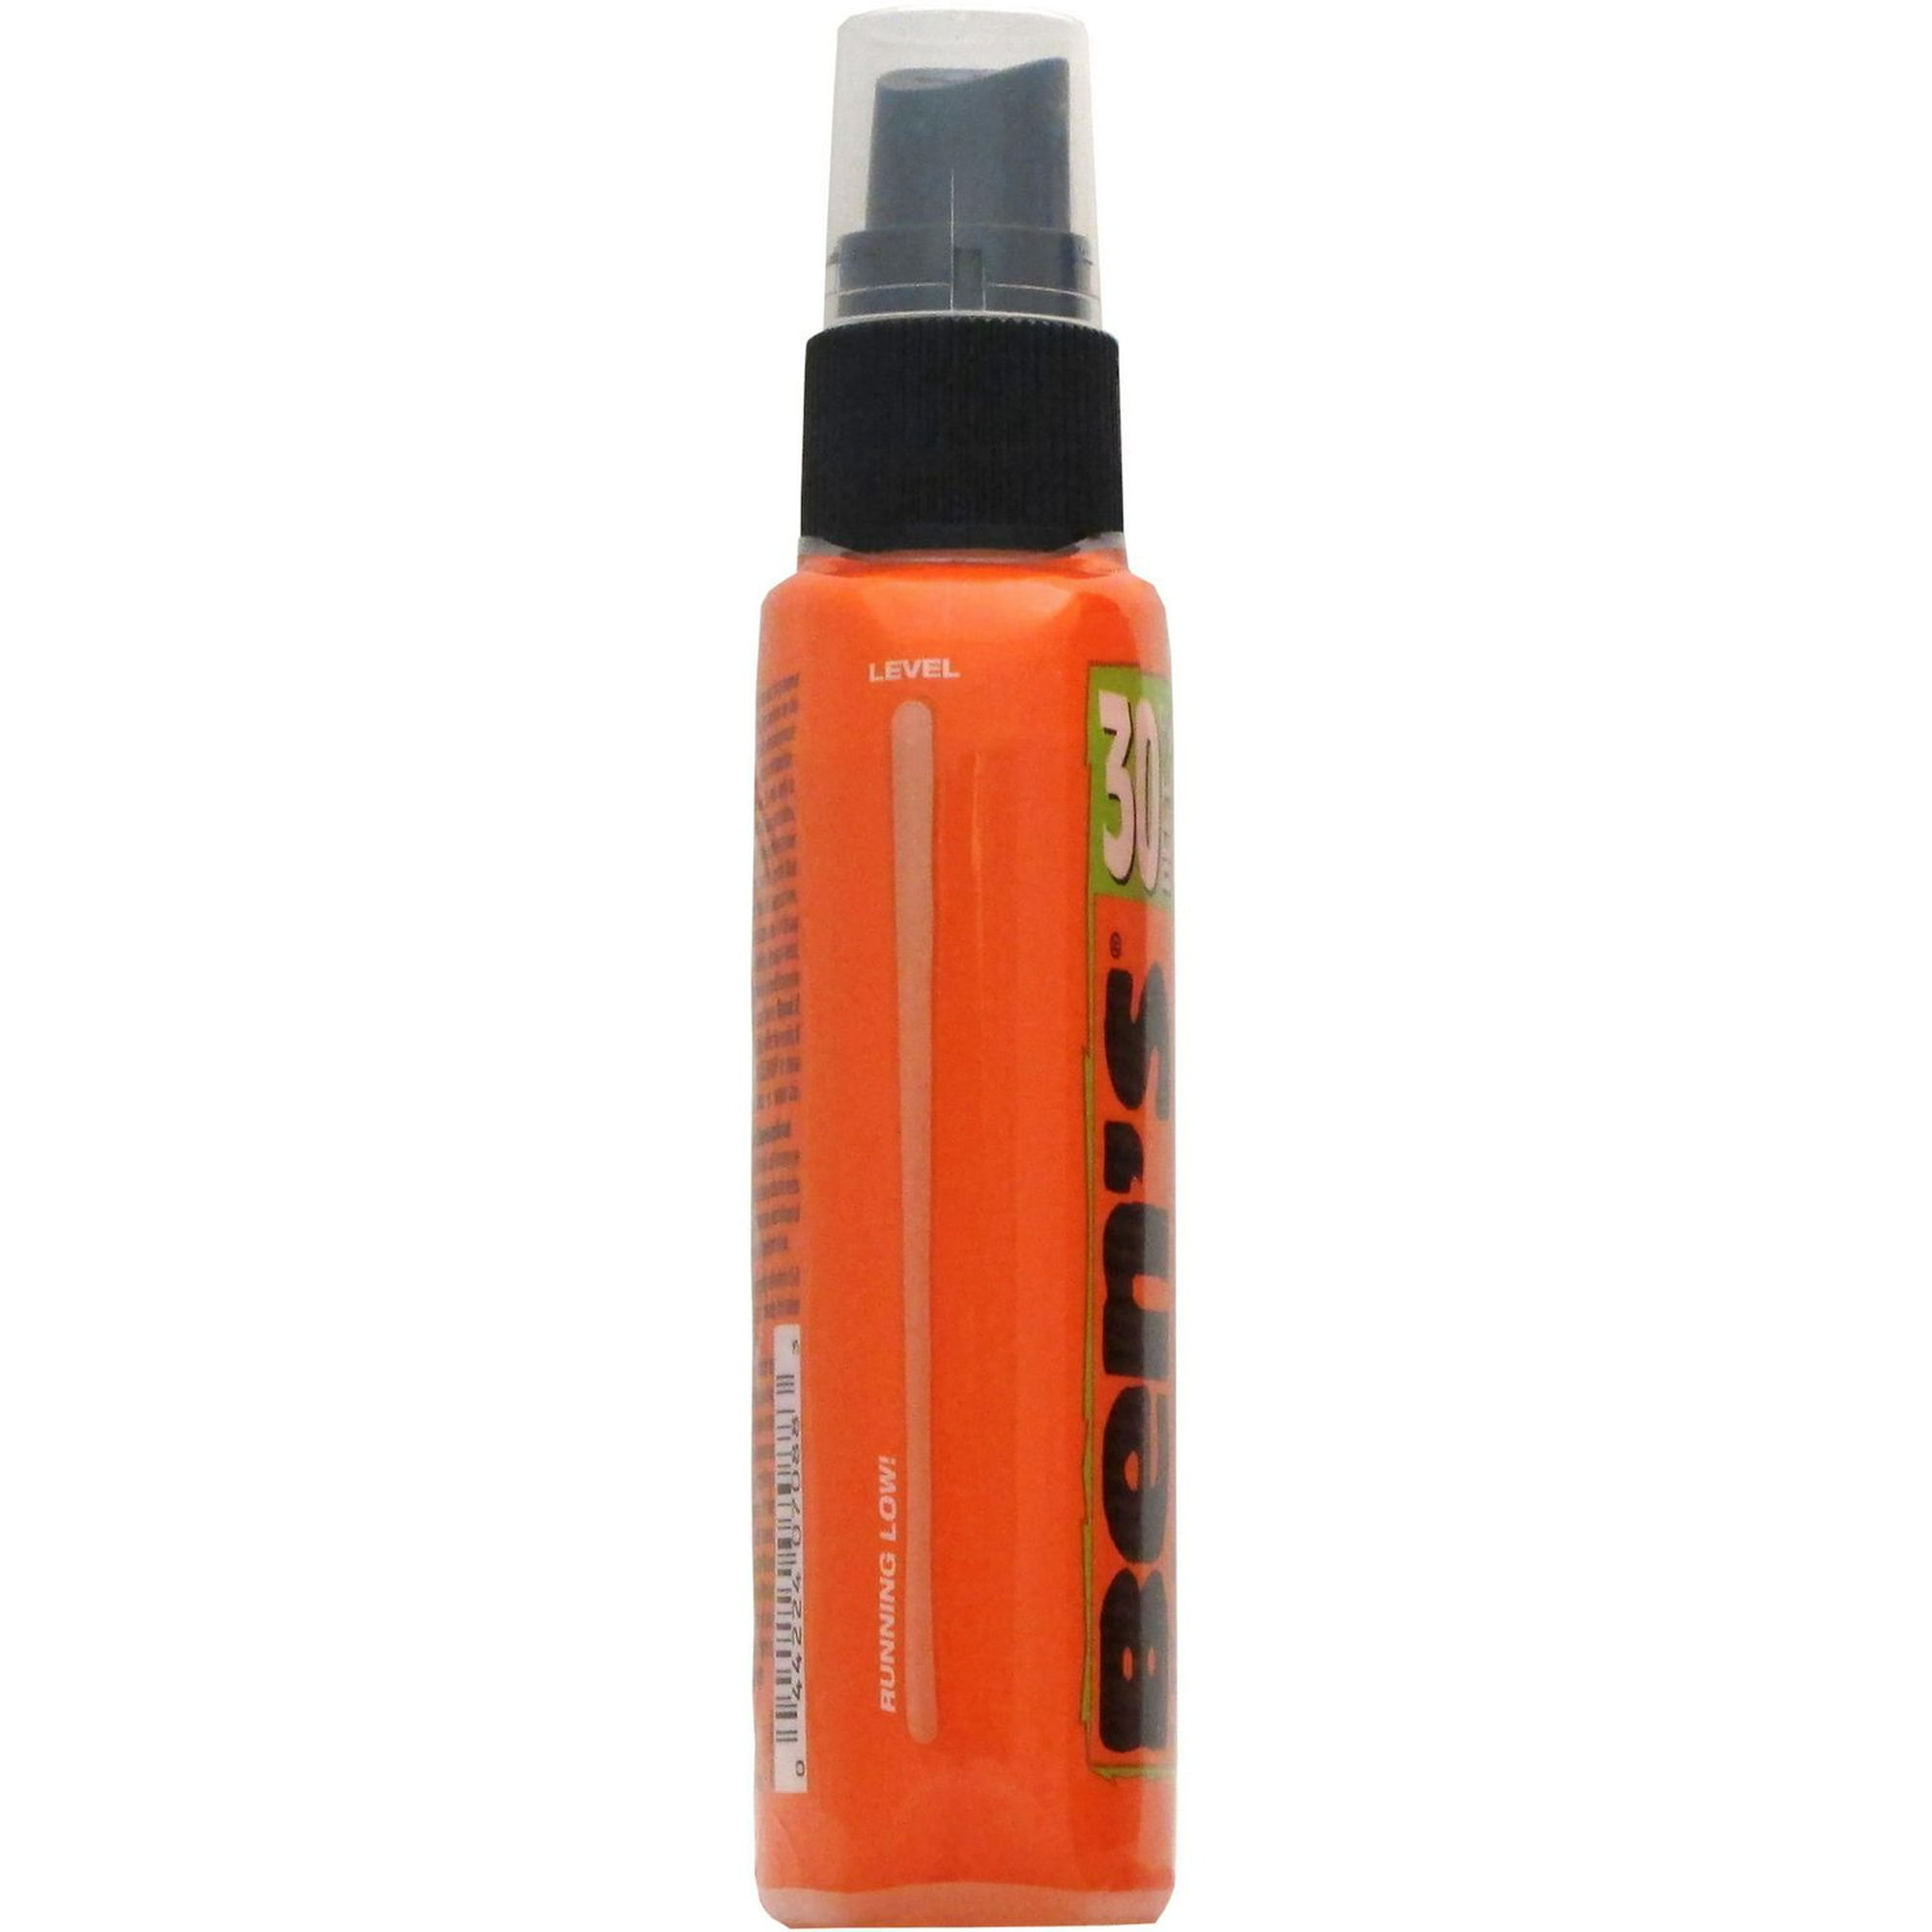 OFF! Deep Woods Insect and Mosquito Repellent, 230 g 